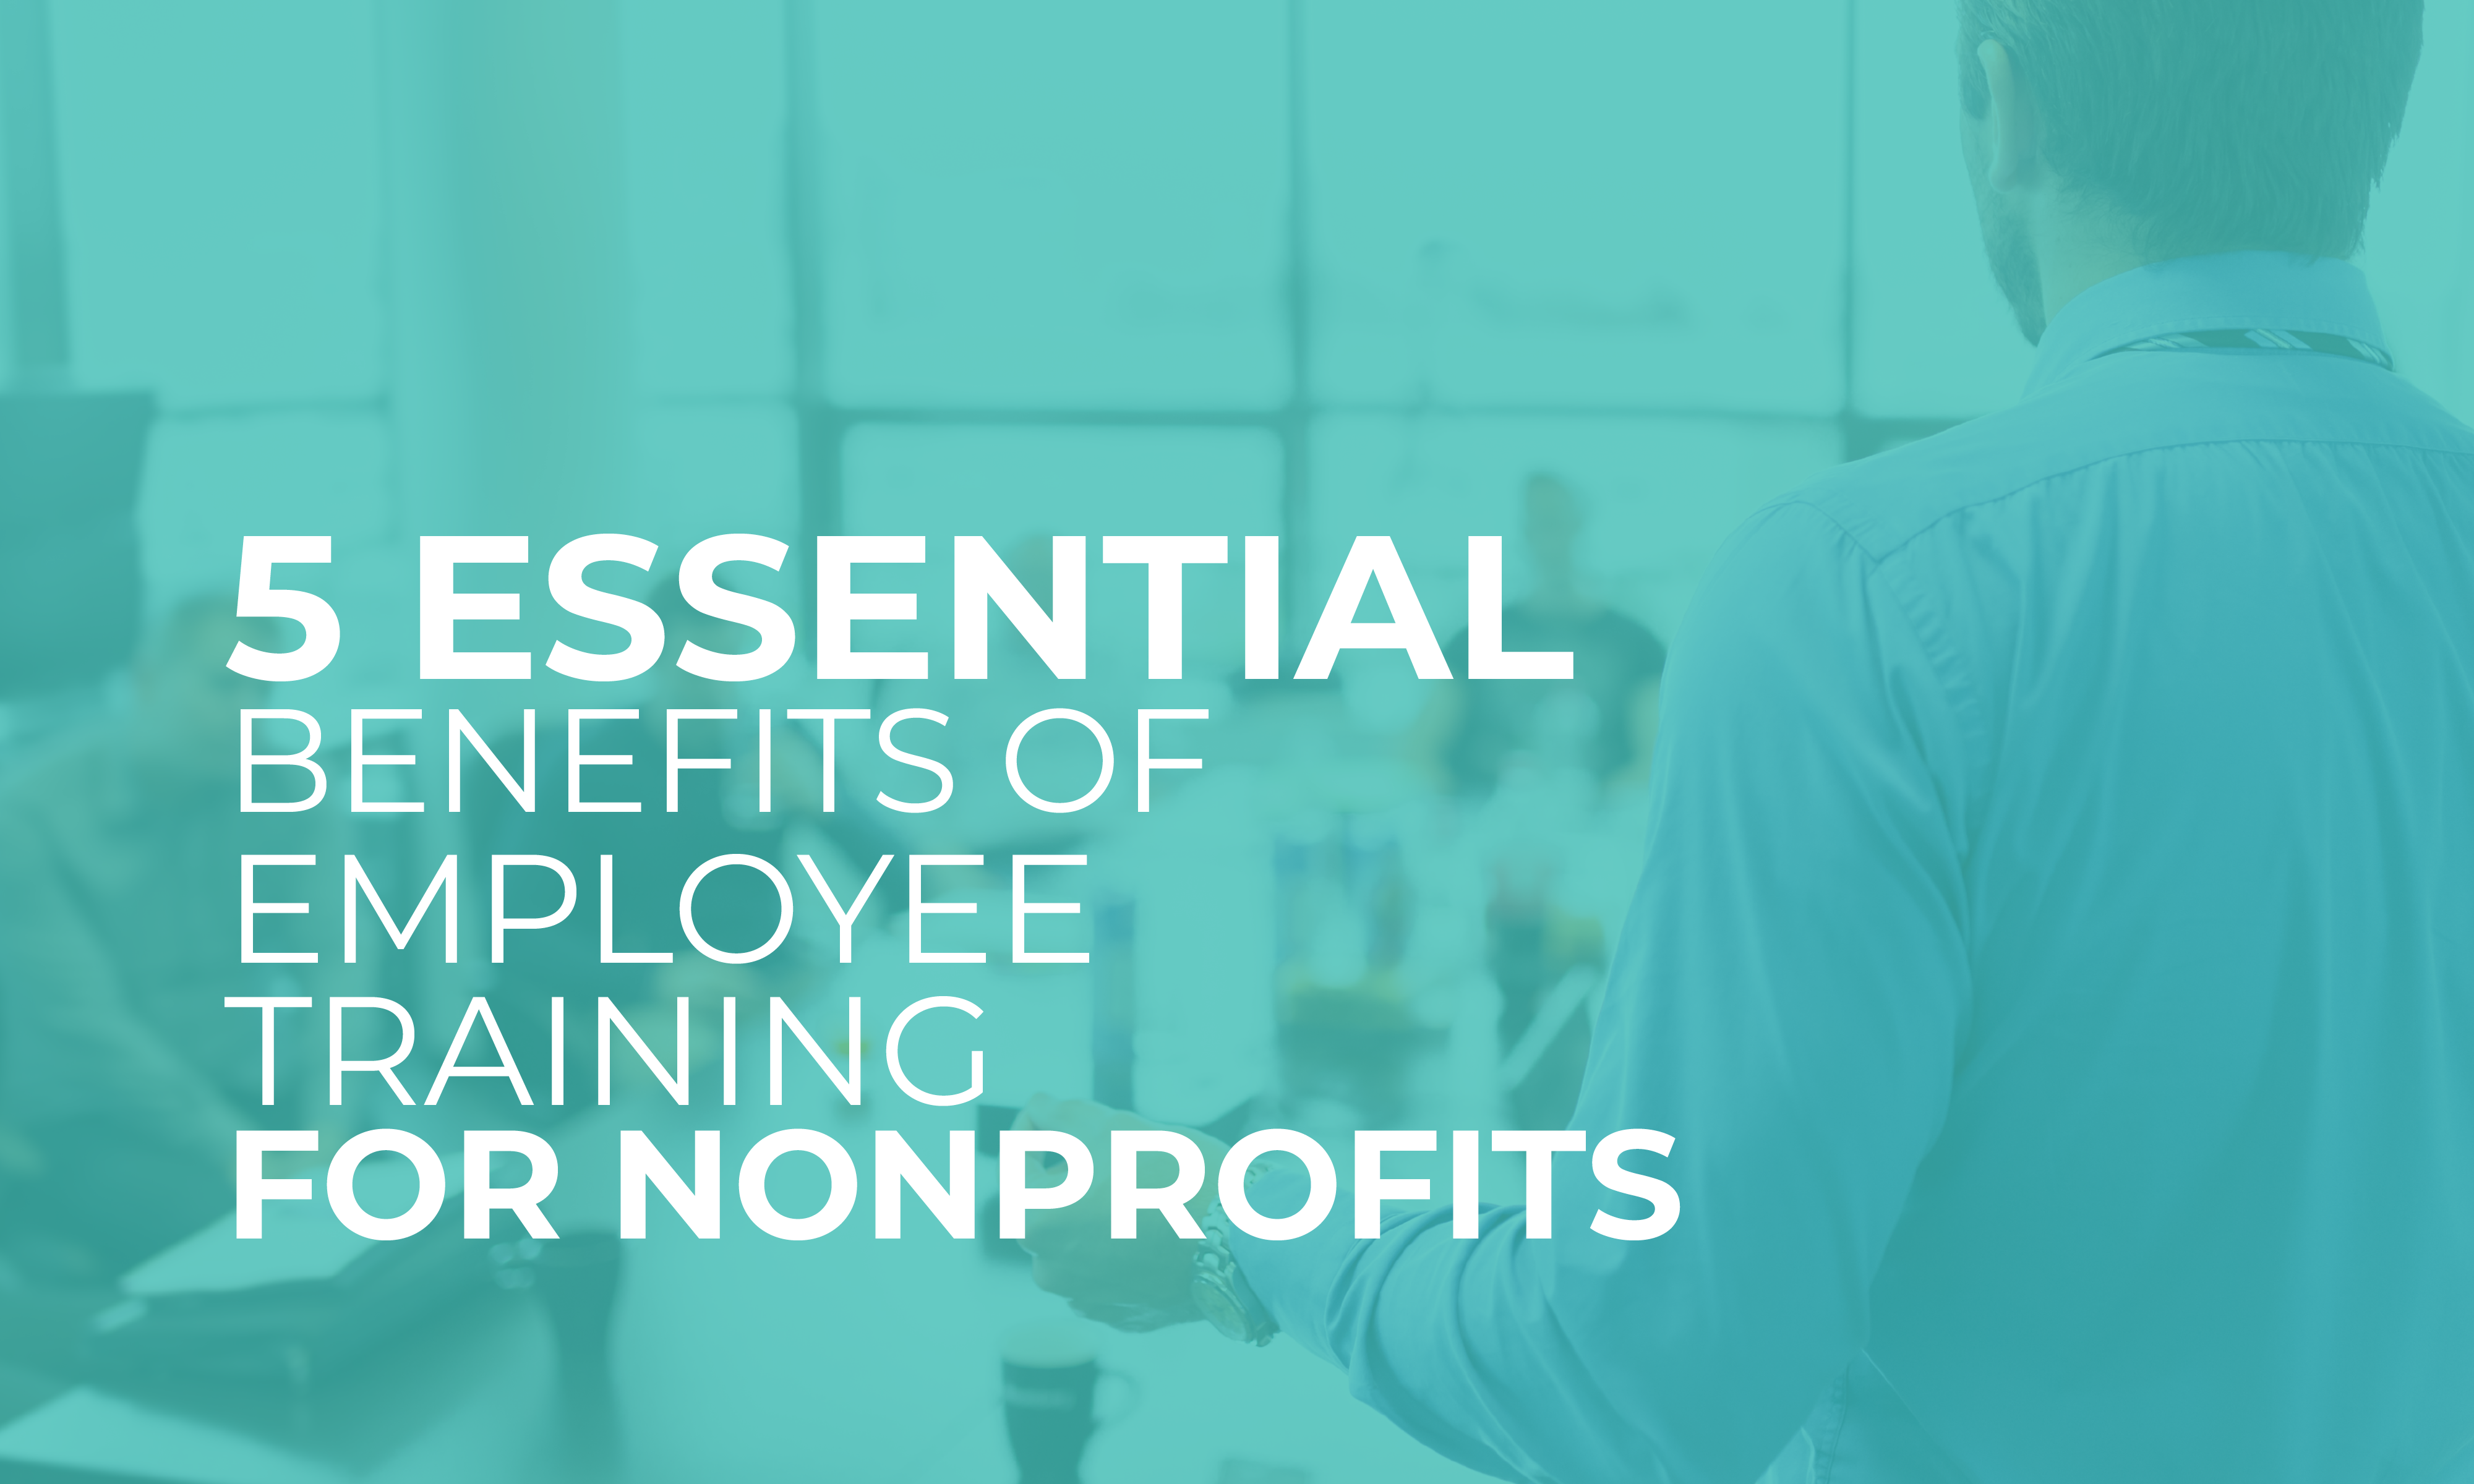 This guide explores five essential benefits of employee training for nonprofits.